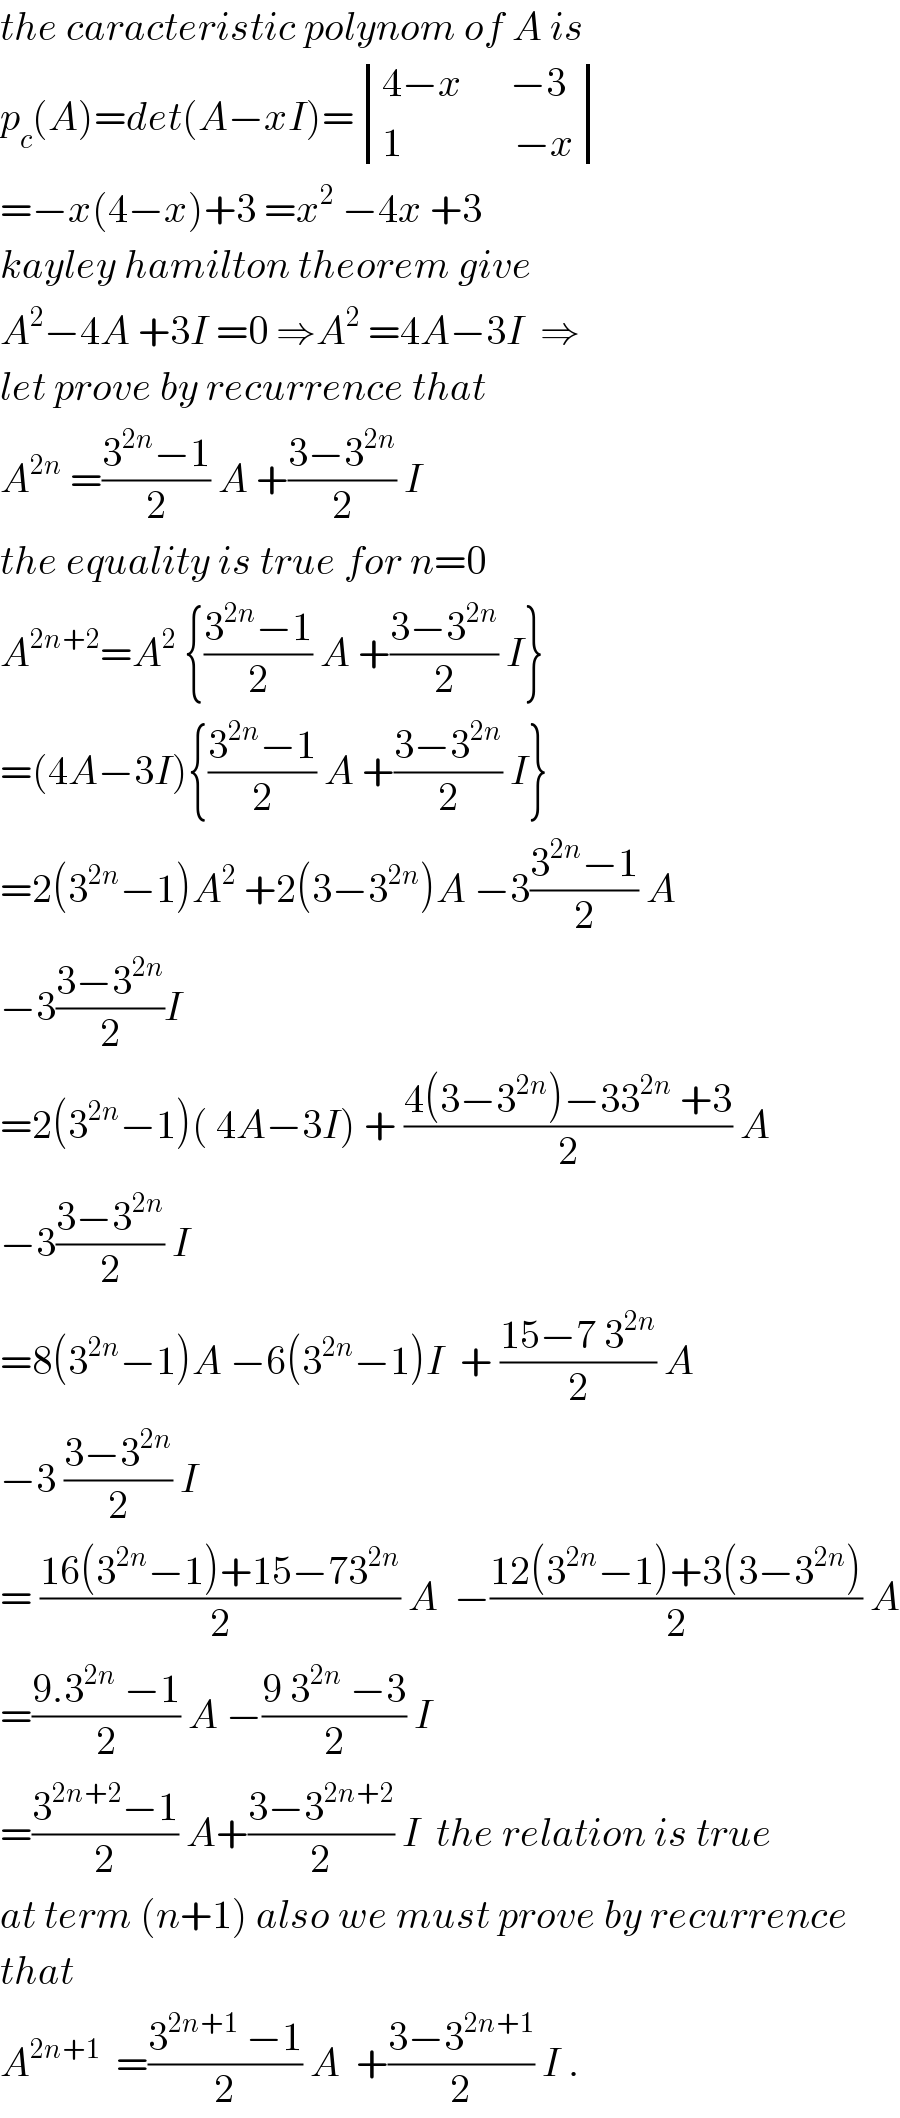 the caracteristic polynom of A is  p_c (A)=det(A−xI)= determinant (((4−x      −3)),((1              −x)))  =−x(4−x)+3 =x^2  −4x +3  kayley hamilton theorem give   A^2 −4A +3I =0 ⇒A^2  =4A−3I  ⇒  let prove by recurrence that  A^(2n)  =((3^(2n) −1)/2) A +((3−3^(2n) )/2) I    the equality is true for n=0  A^(2n+2) =A^2  {((3^(2n) −1)/2) A +((3−3^(2n) )/2) I}  =(4A−3I){((3^(2n) −1)/2) A +((3−3^(2n) )/2) I}  =2(3^(2n) −1)A^2  +2(3−3^(2n) )A −3((3^(2n) −1)/2) A  −3((3−3^(2n) )/2)I   =2(3^(2n) −1)( 4A−3I) + ((4(3−3^(2n) )−33^(2n)  +3)/2) A  −3((3−3^(2n) )/2) I  =8(3^(2n) −1)A −6(3^(2n) −1)I  + ((15−7 3^(2n) )/2) A  −3 ((3−3^(2n) )/2) I  = ((16(3^(2n) −1)+15−73^(2n) )/2) A  −((12(3^(2n) −1)+3(3−3^(2n) ))/2) A  =((9.3^(2n)  −1)/2) A −((9 3^(2n)  −3)/2) I  =((3^(2n+2) −1)/2) A+((3−3^(2n+2) )/2) I  the relation is true  at term (n+1) also we must prove by recurrence  that  A^(2n+1)   =((3^(2n+1)  −1)/2) A  +((3−3^(2n+1) )/2) I .  